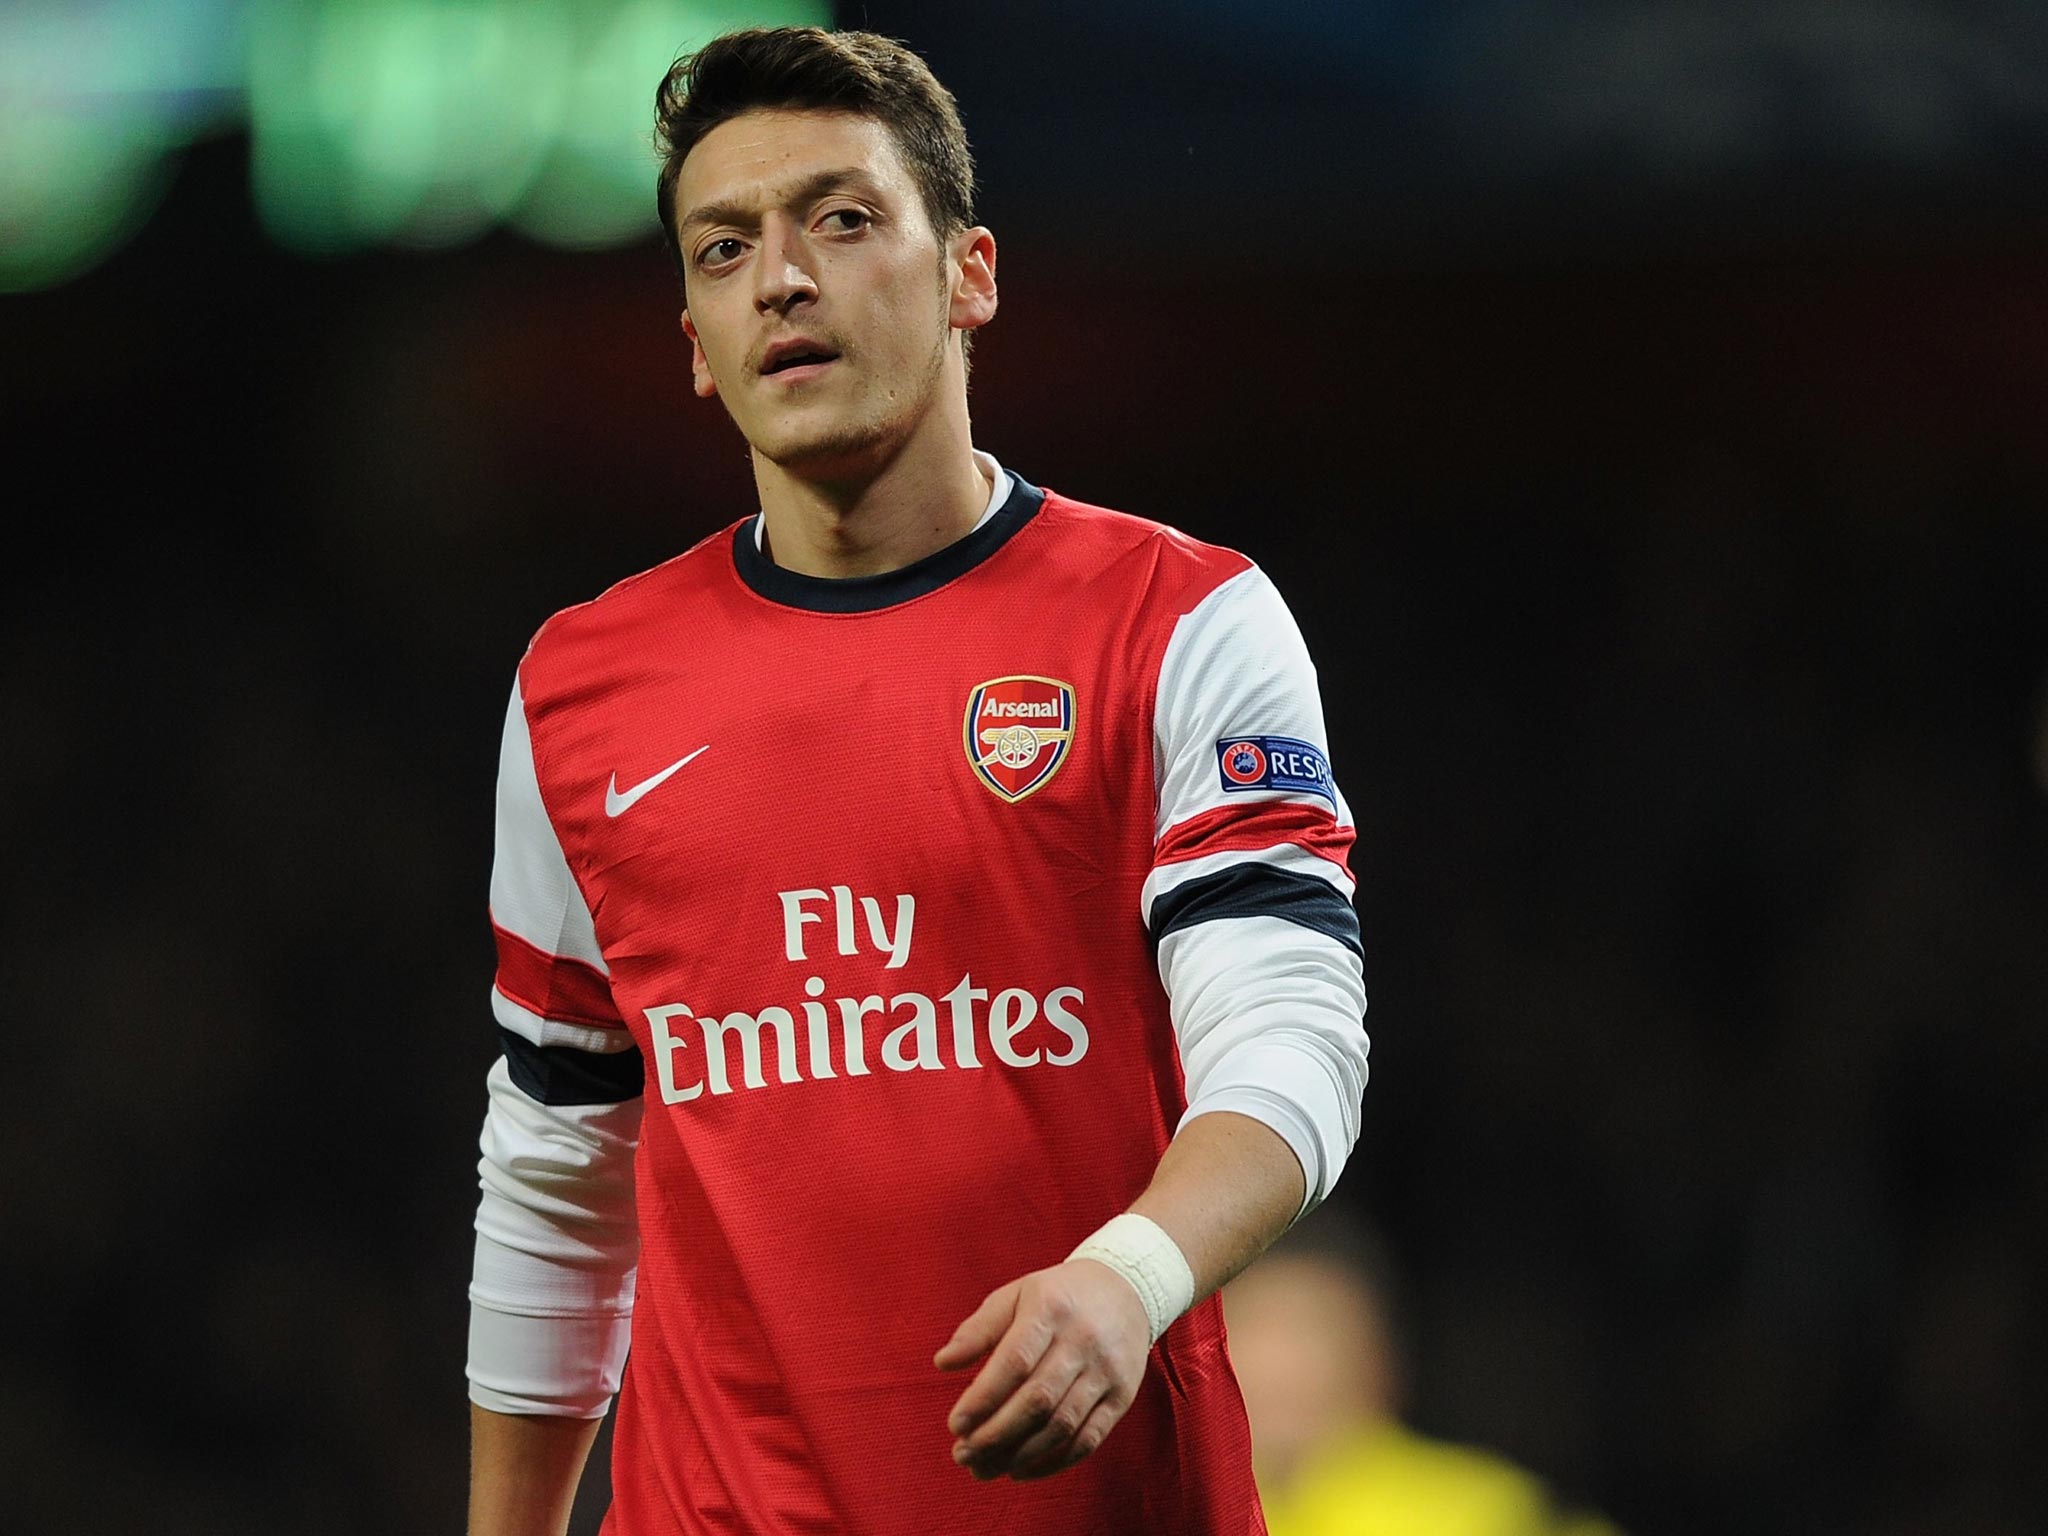 Mesut Özil was criticised for a lack of consistency last season for Arsenal